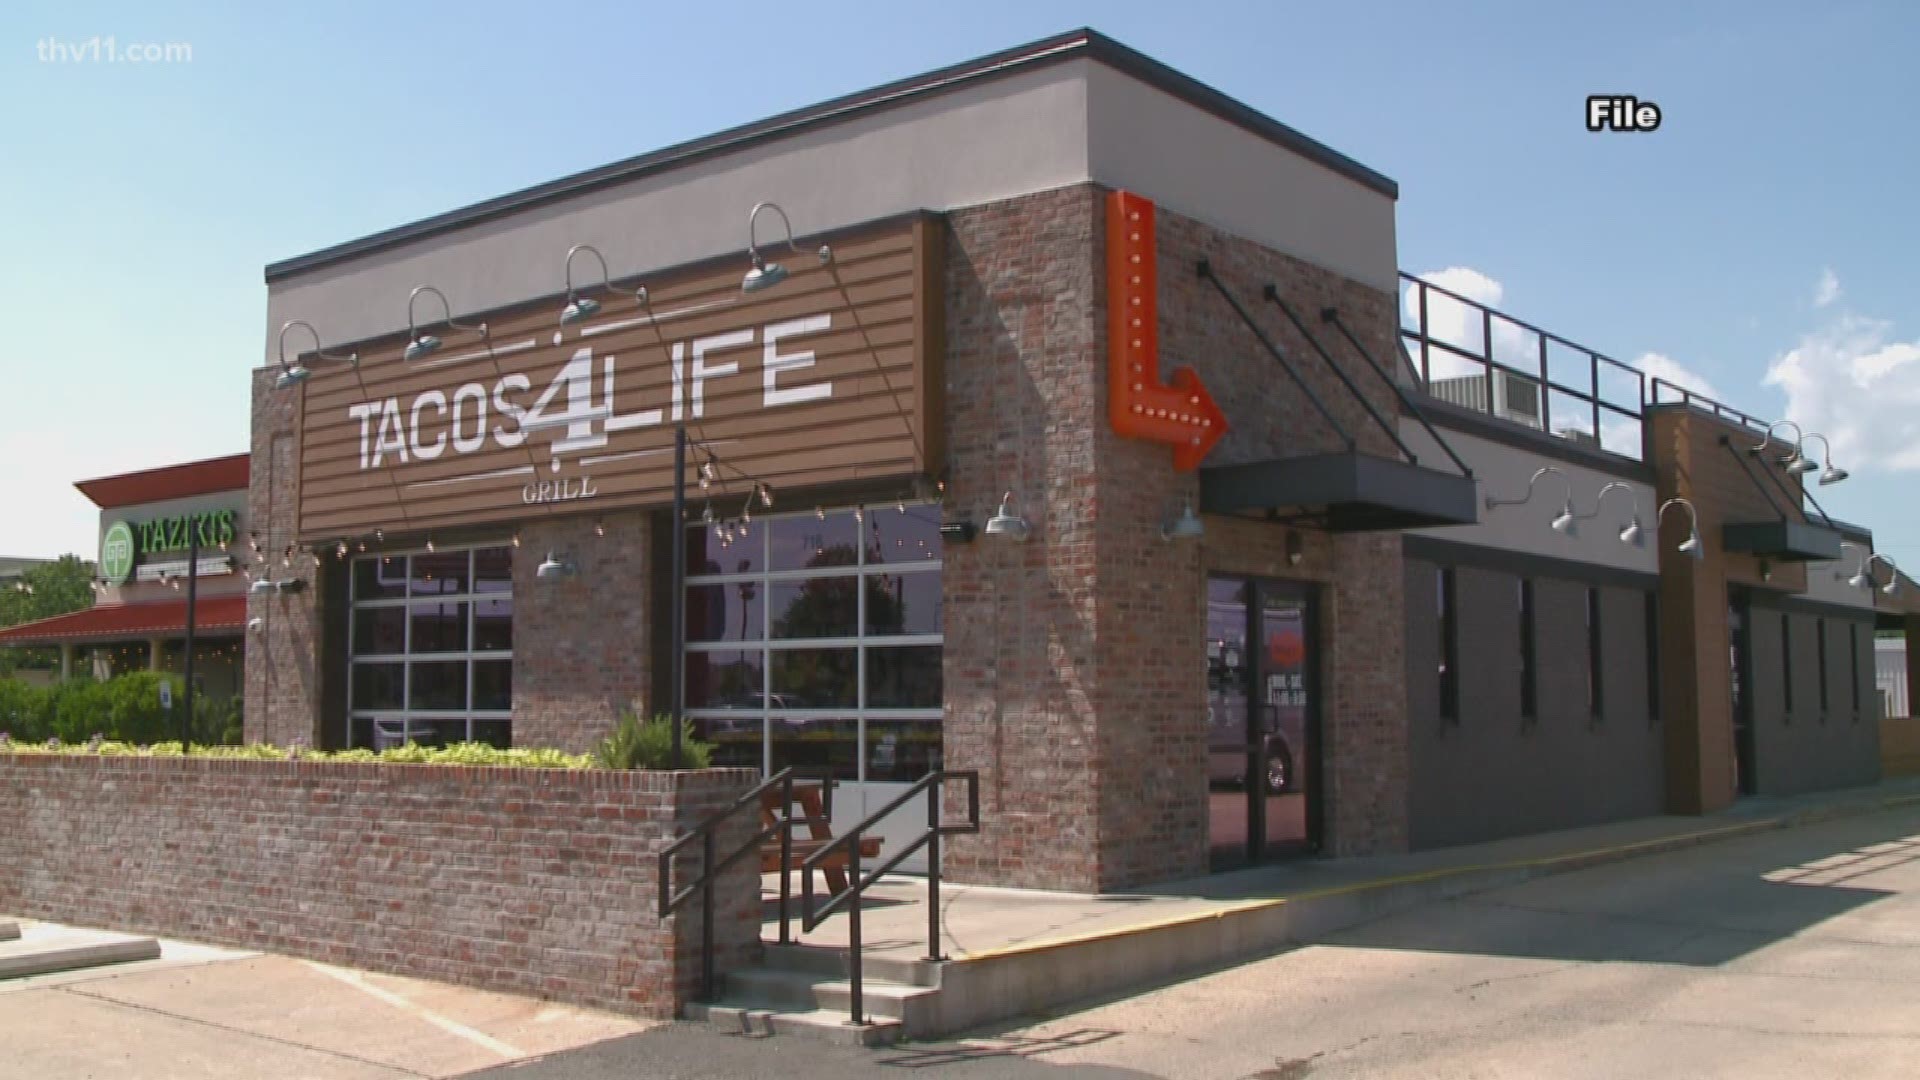 Tacos 4 Life will open a new location near the McCain Mall this summer.